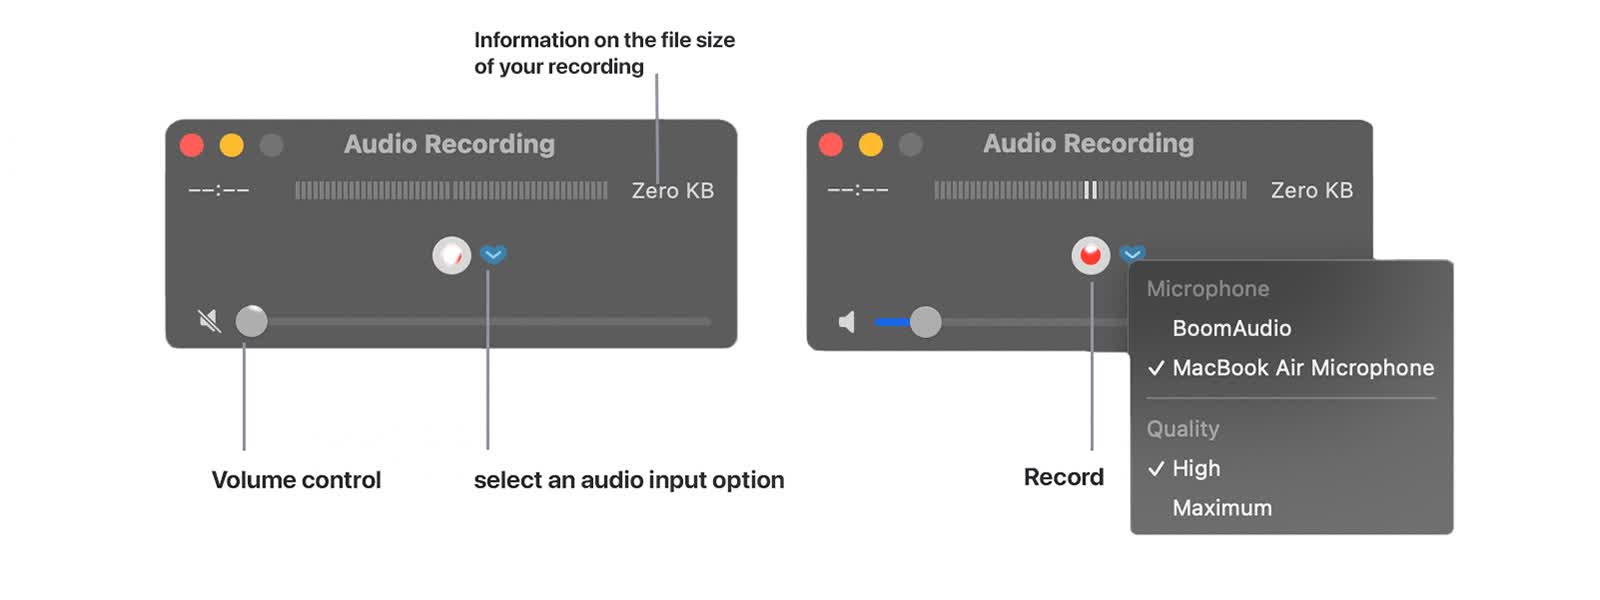 How to Record audio on Mac with Quicktime